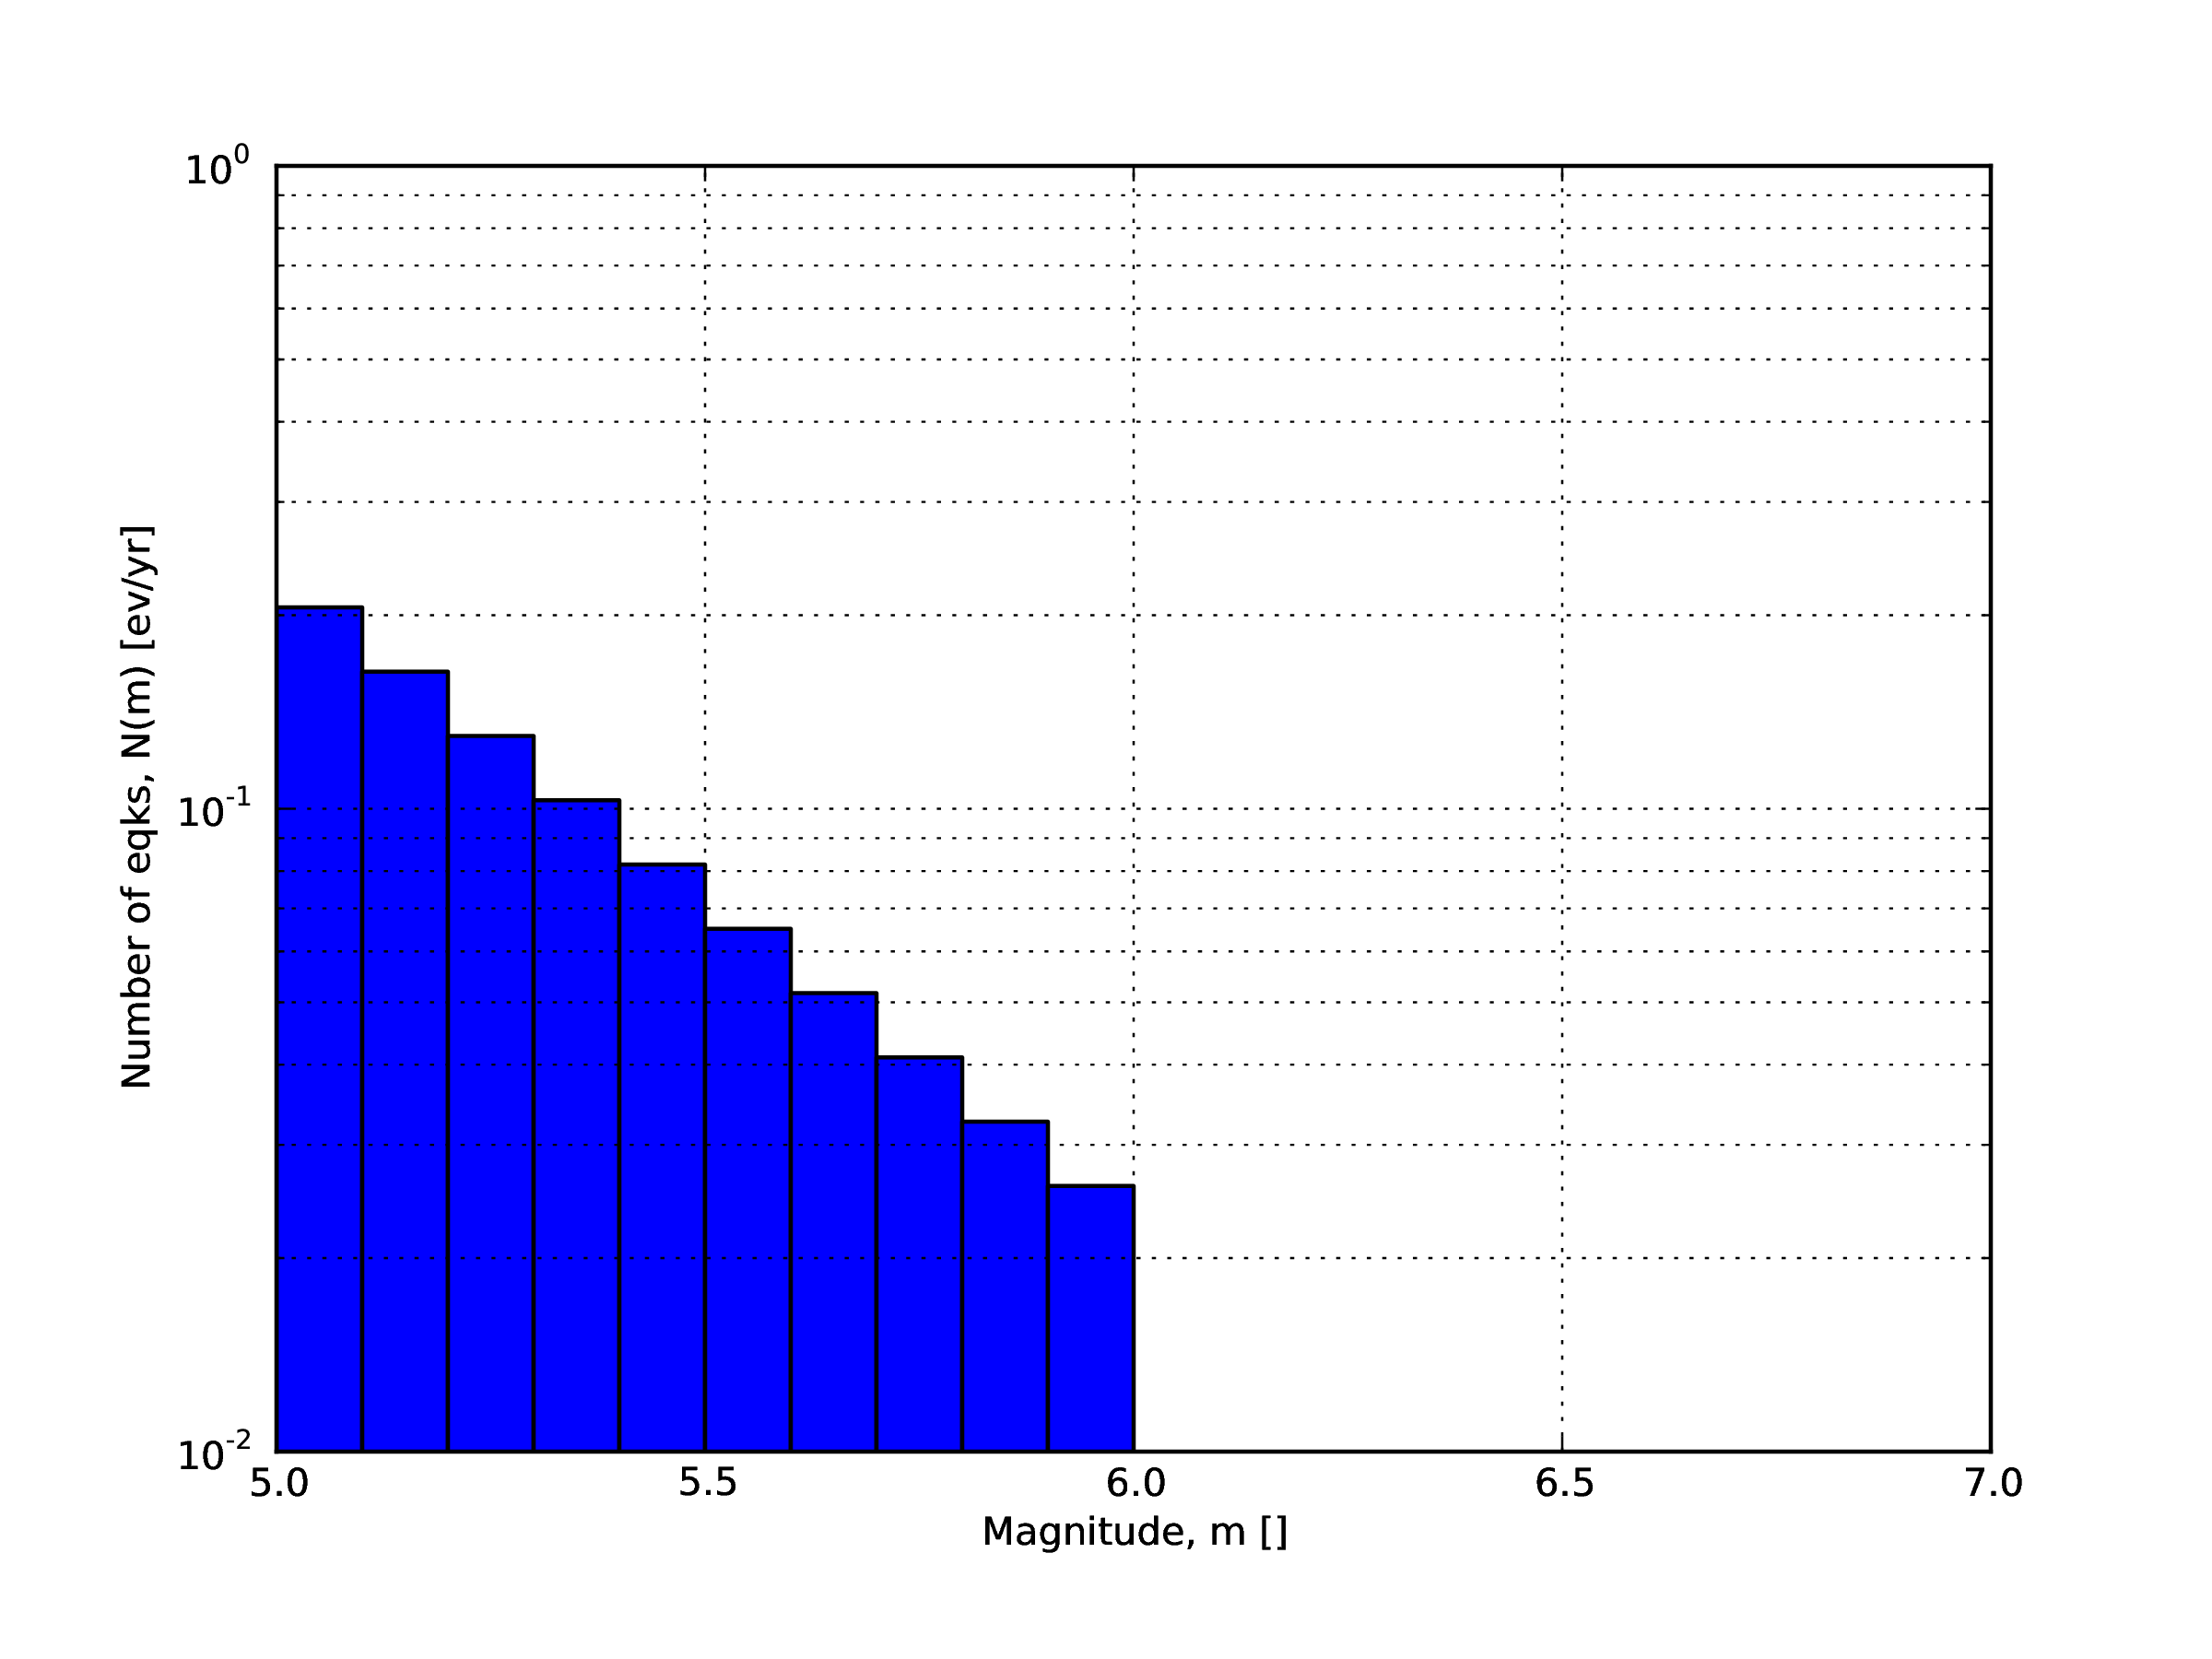 Example of a double truncated Gutenberg-Richter magnitude-frequency distribution.